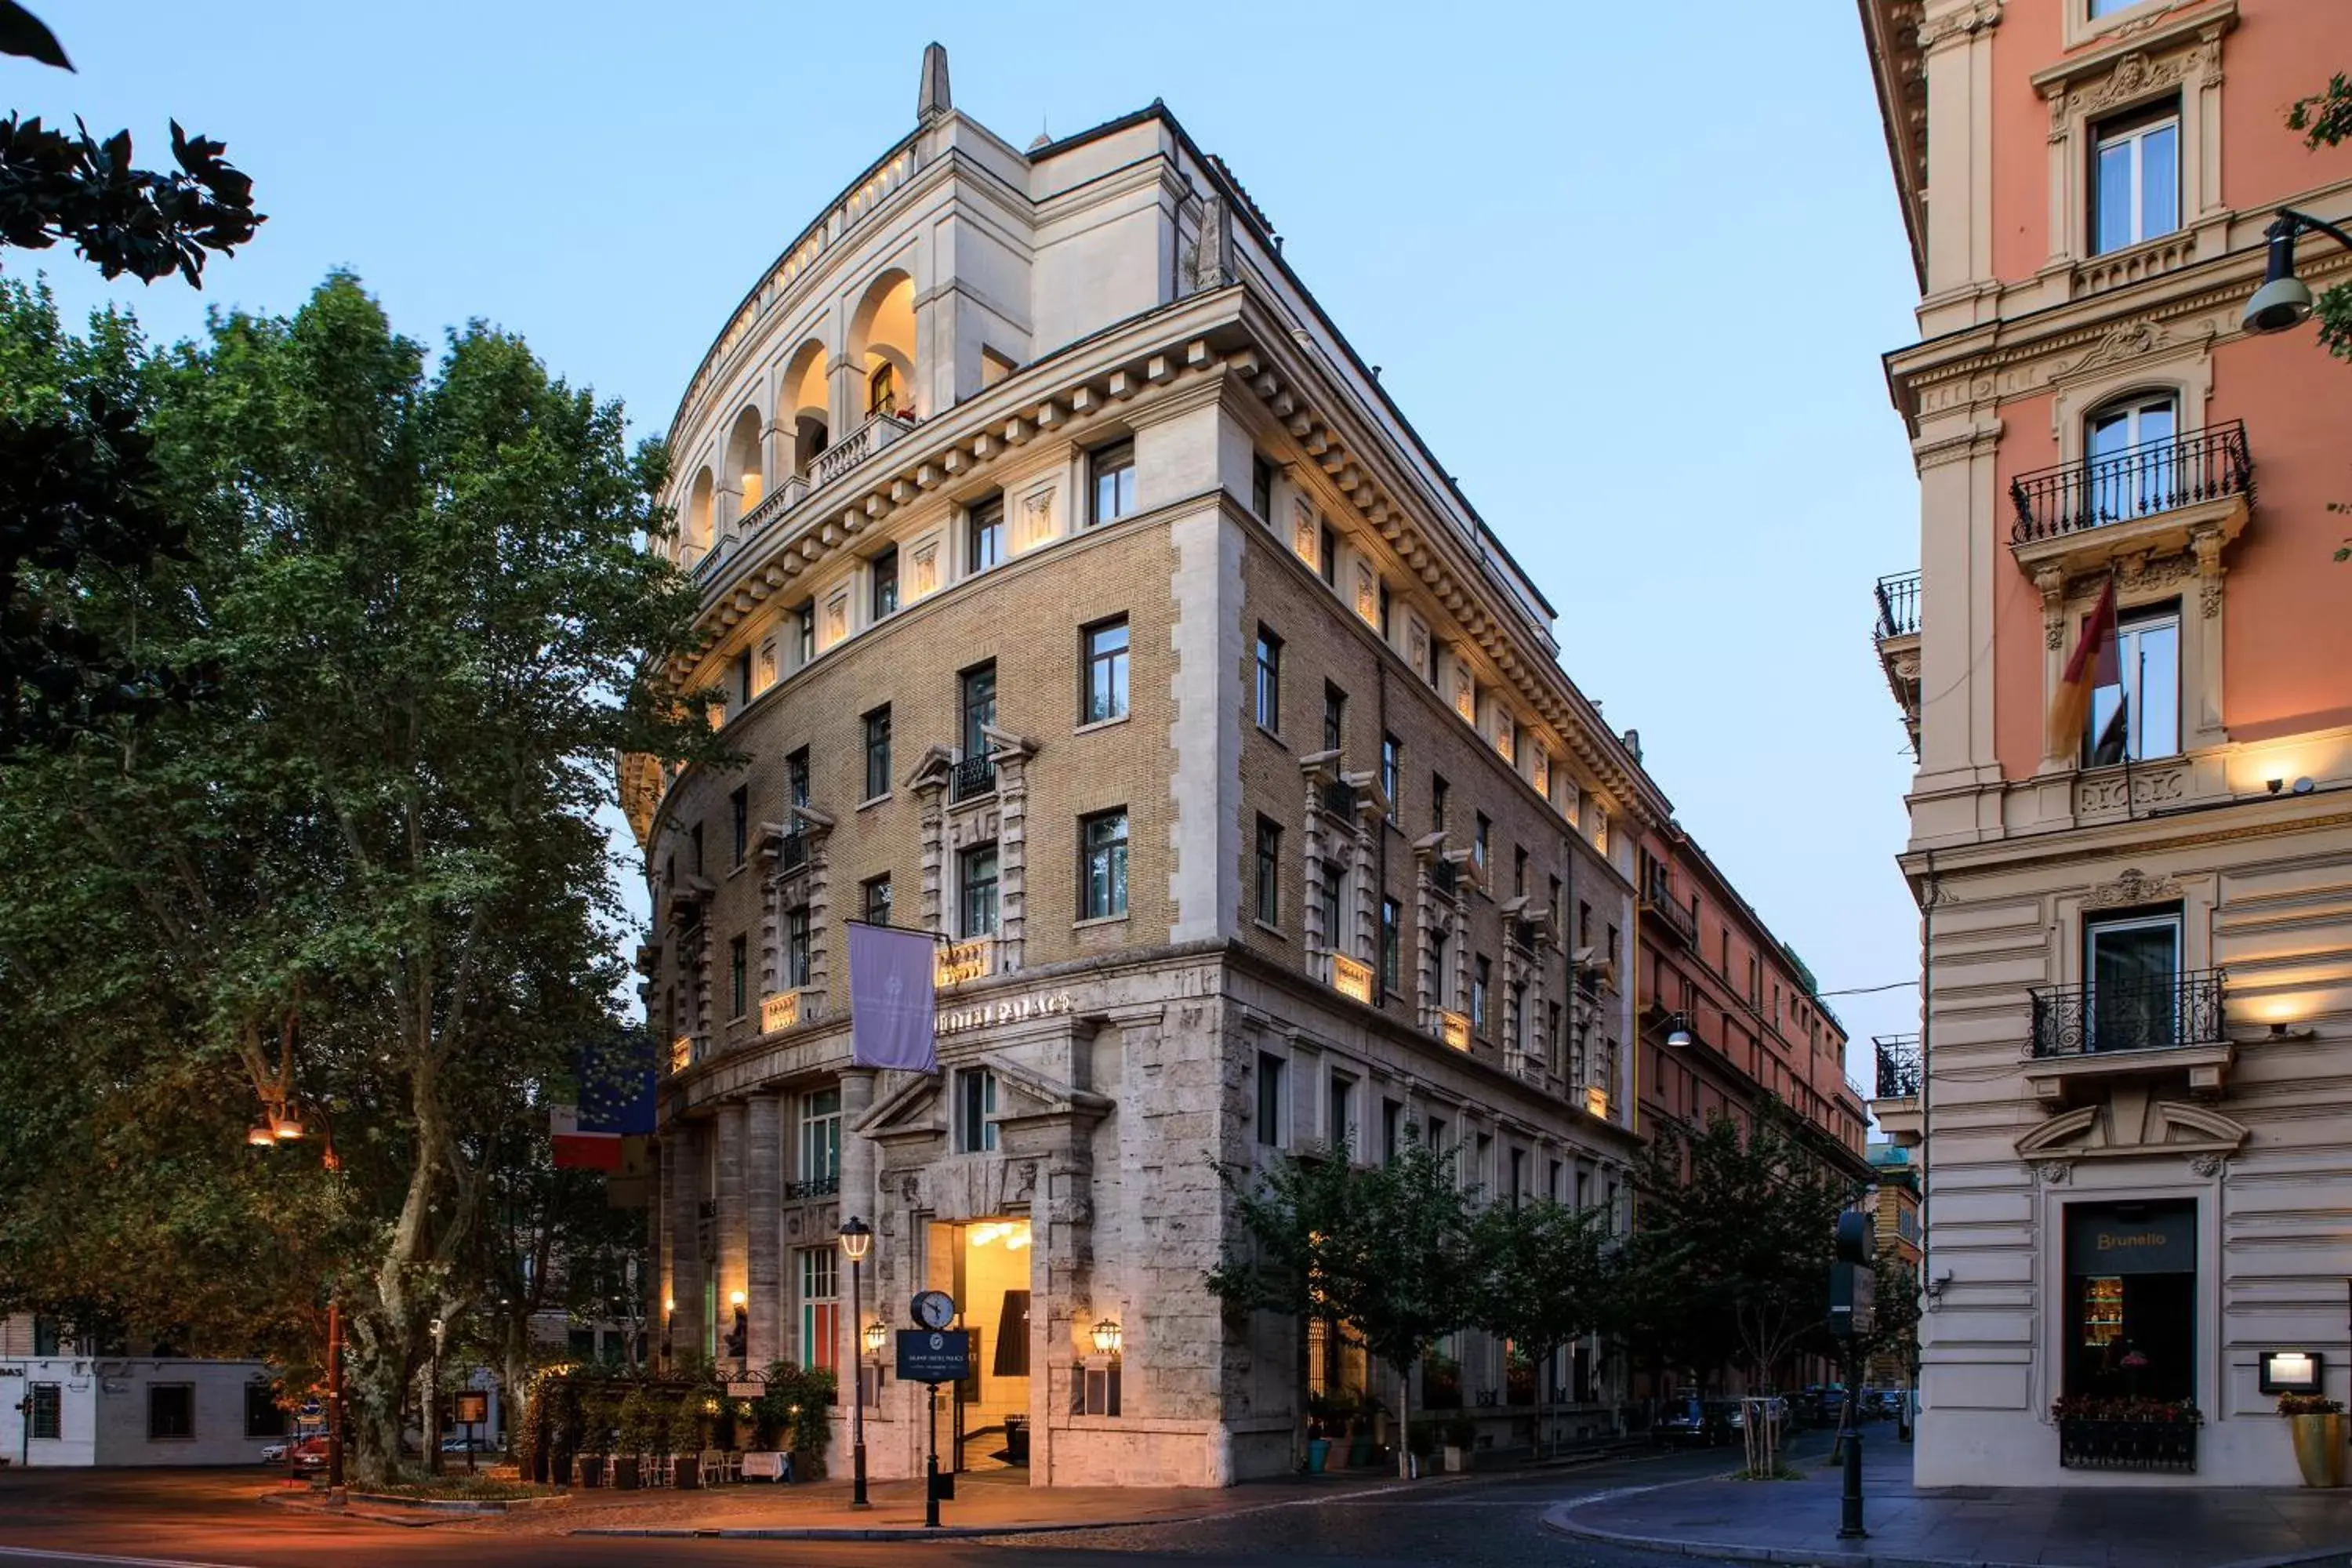 Property building in Grand Hotel Palace Rome